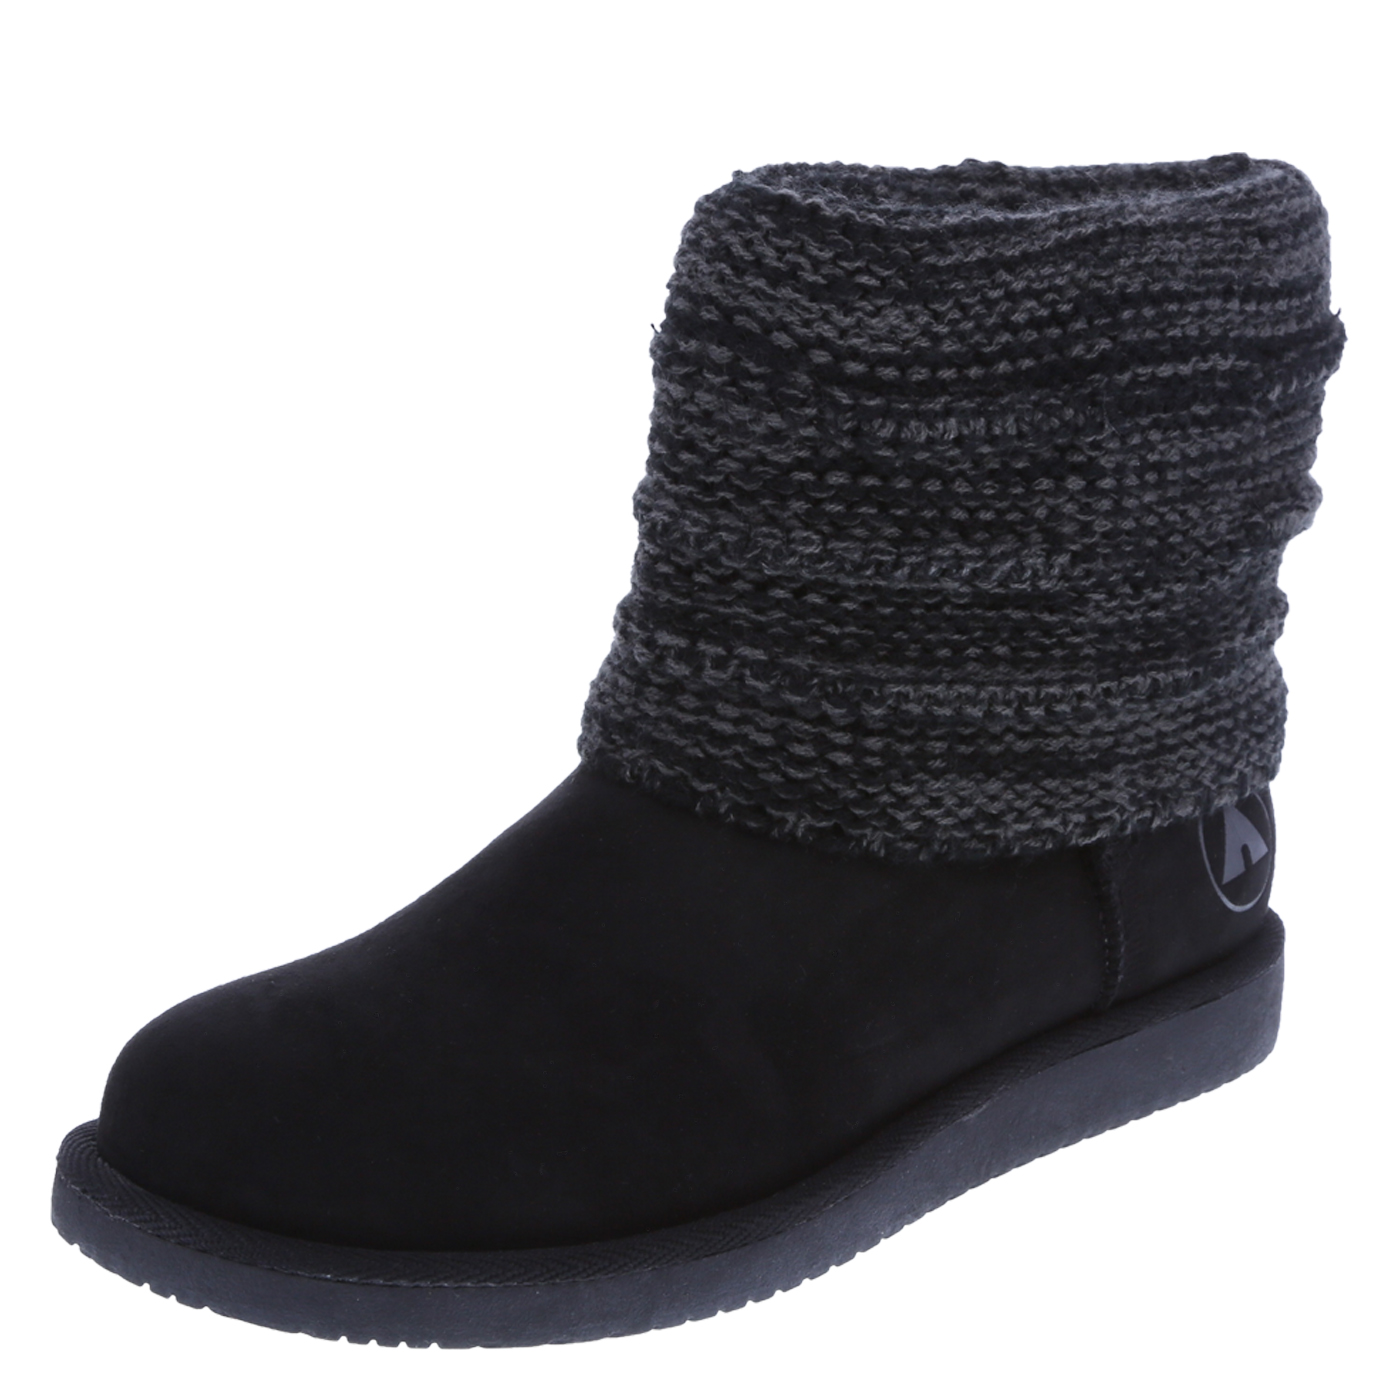 ankle boots for women womenu0027s naomi sweater cozy boot, black, hi-res ZEUFZXO